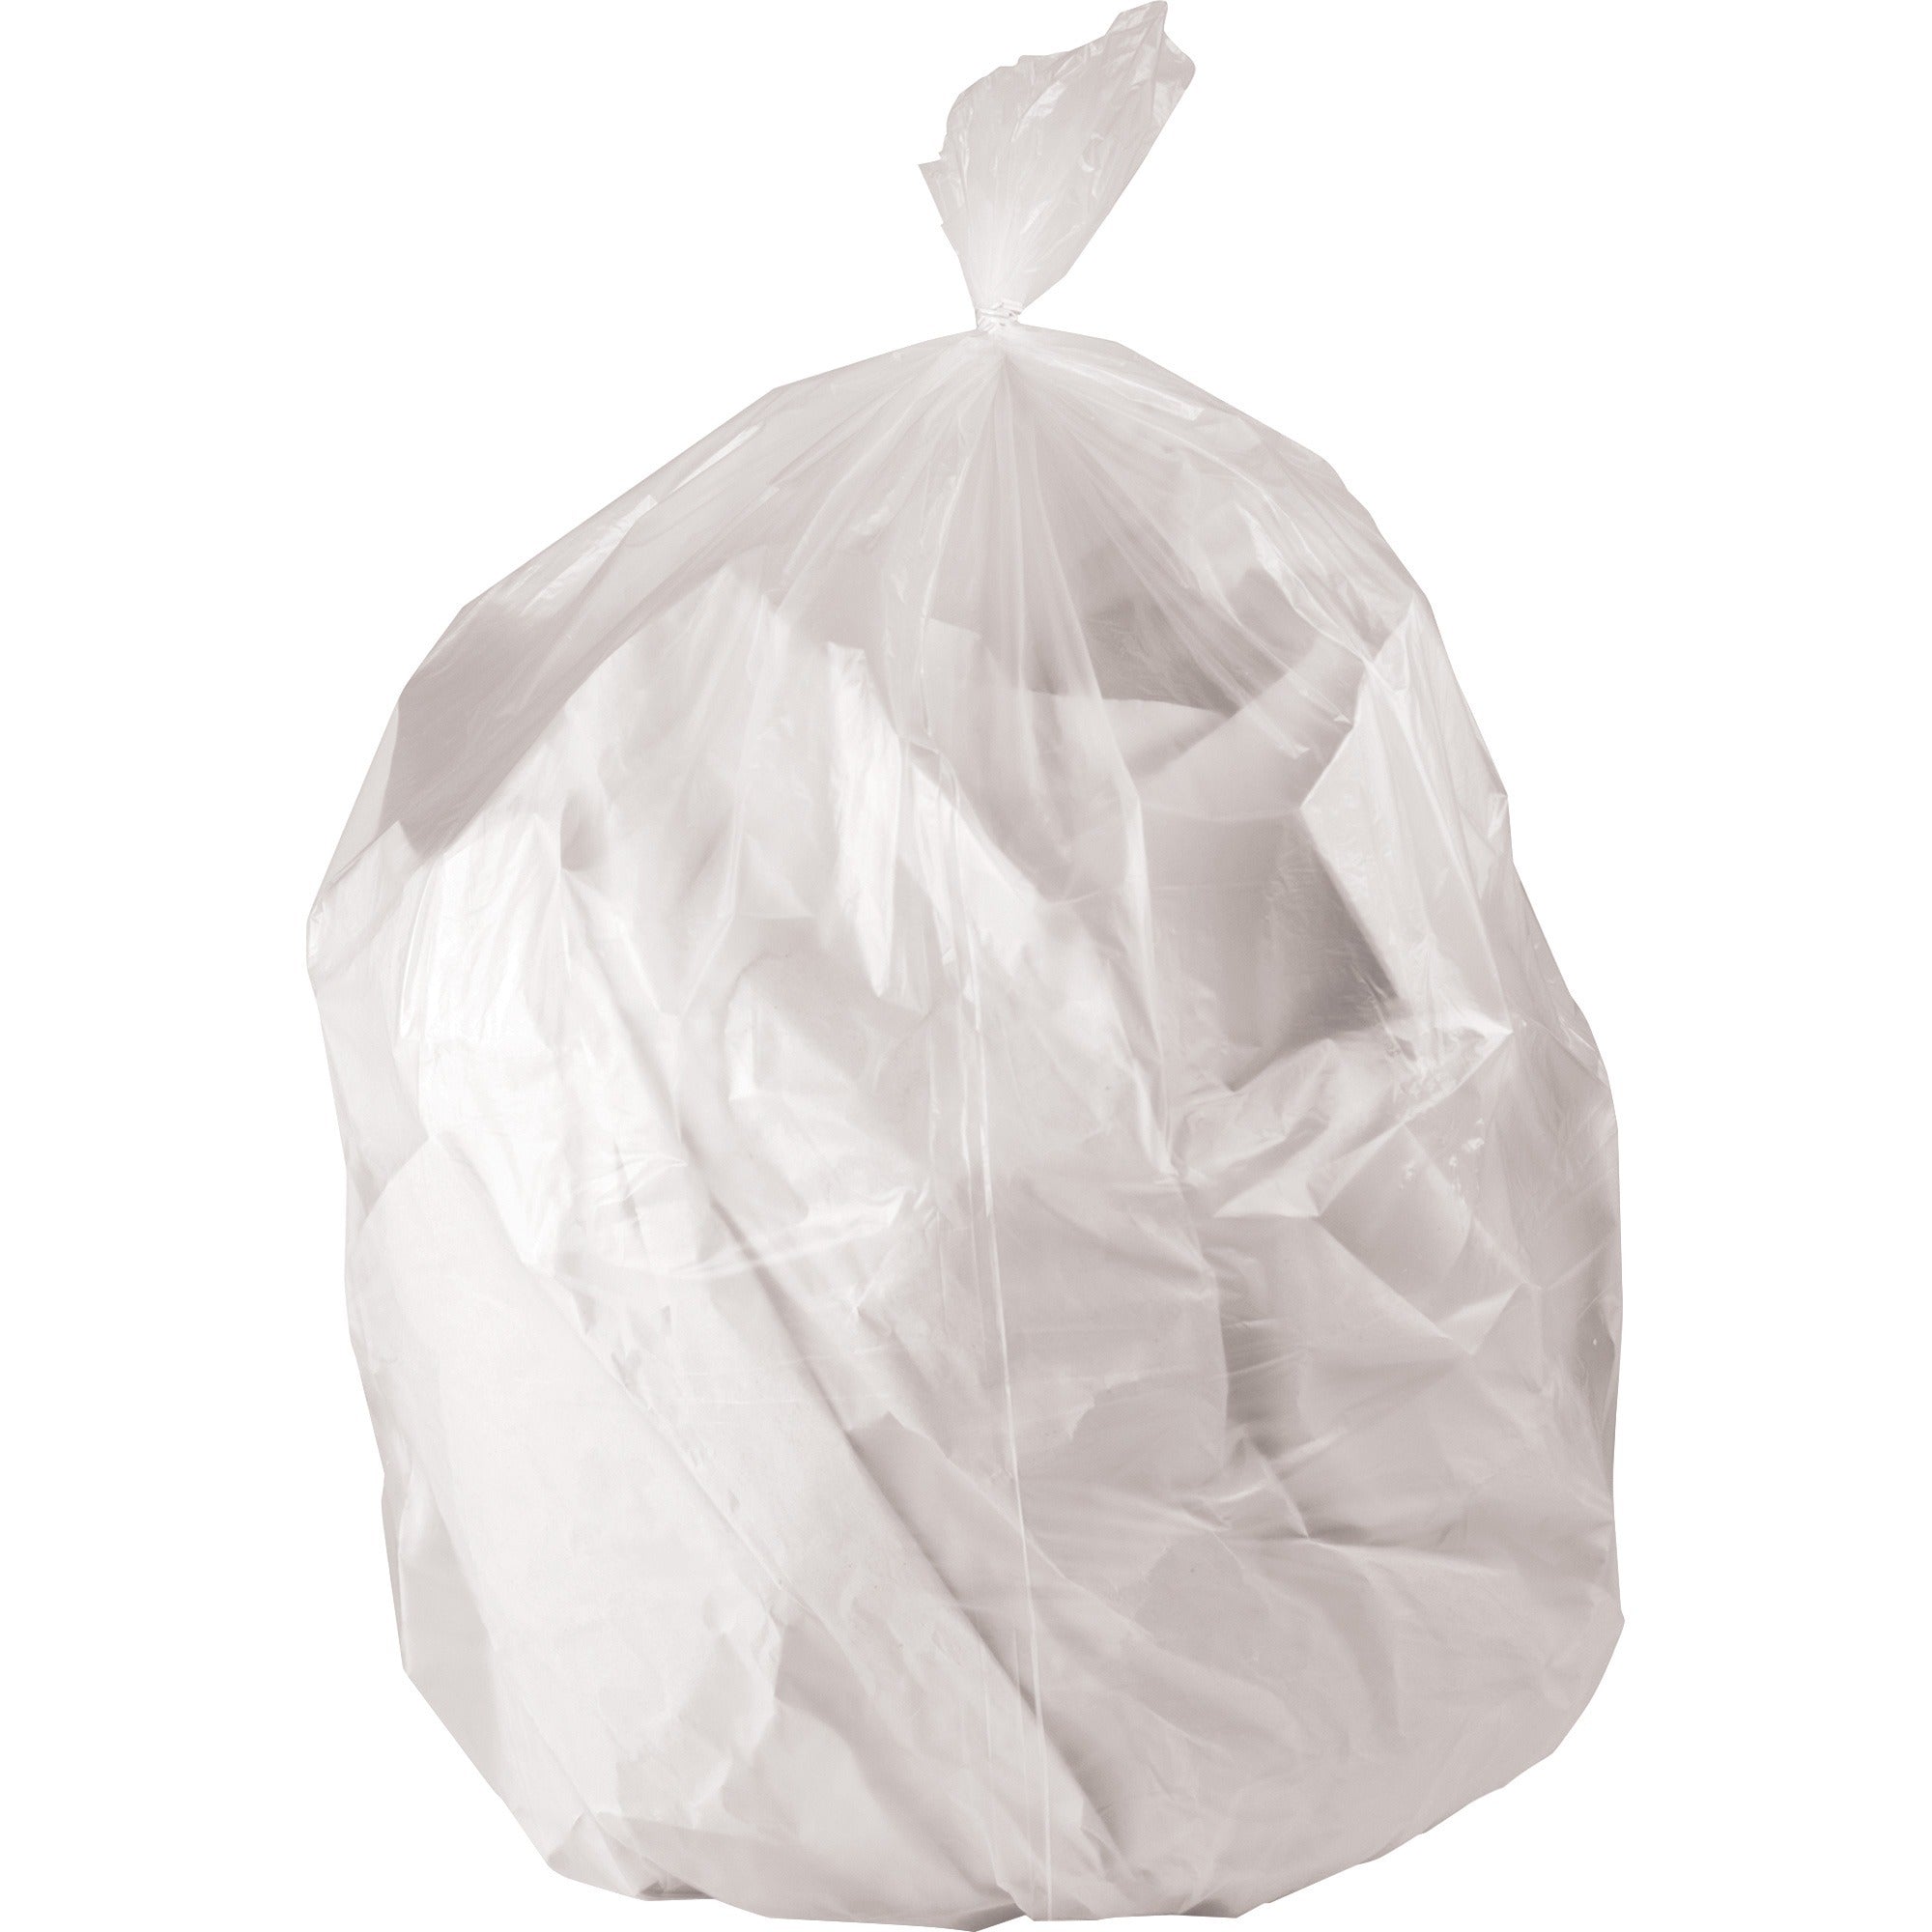 genuine-joe-strong-economical-trash-bags-45-gal-capacity-40-width-x-48-length-087-mil-22-micron-thickness-clear-resin-150-carton-waste-disposal_gjo02859 - 1